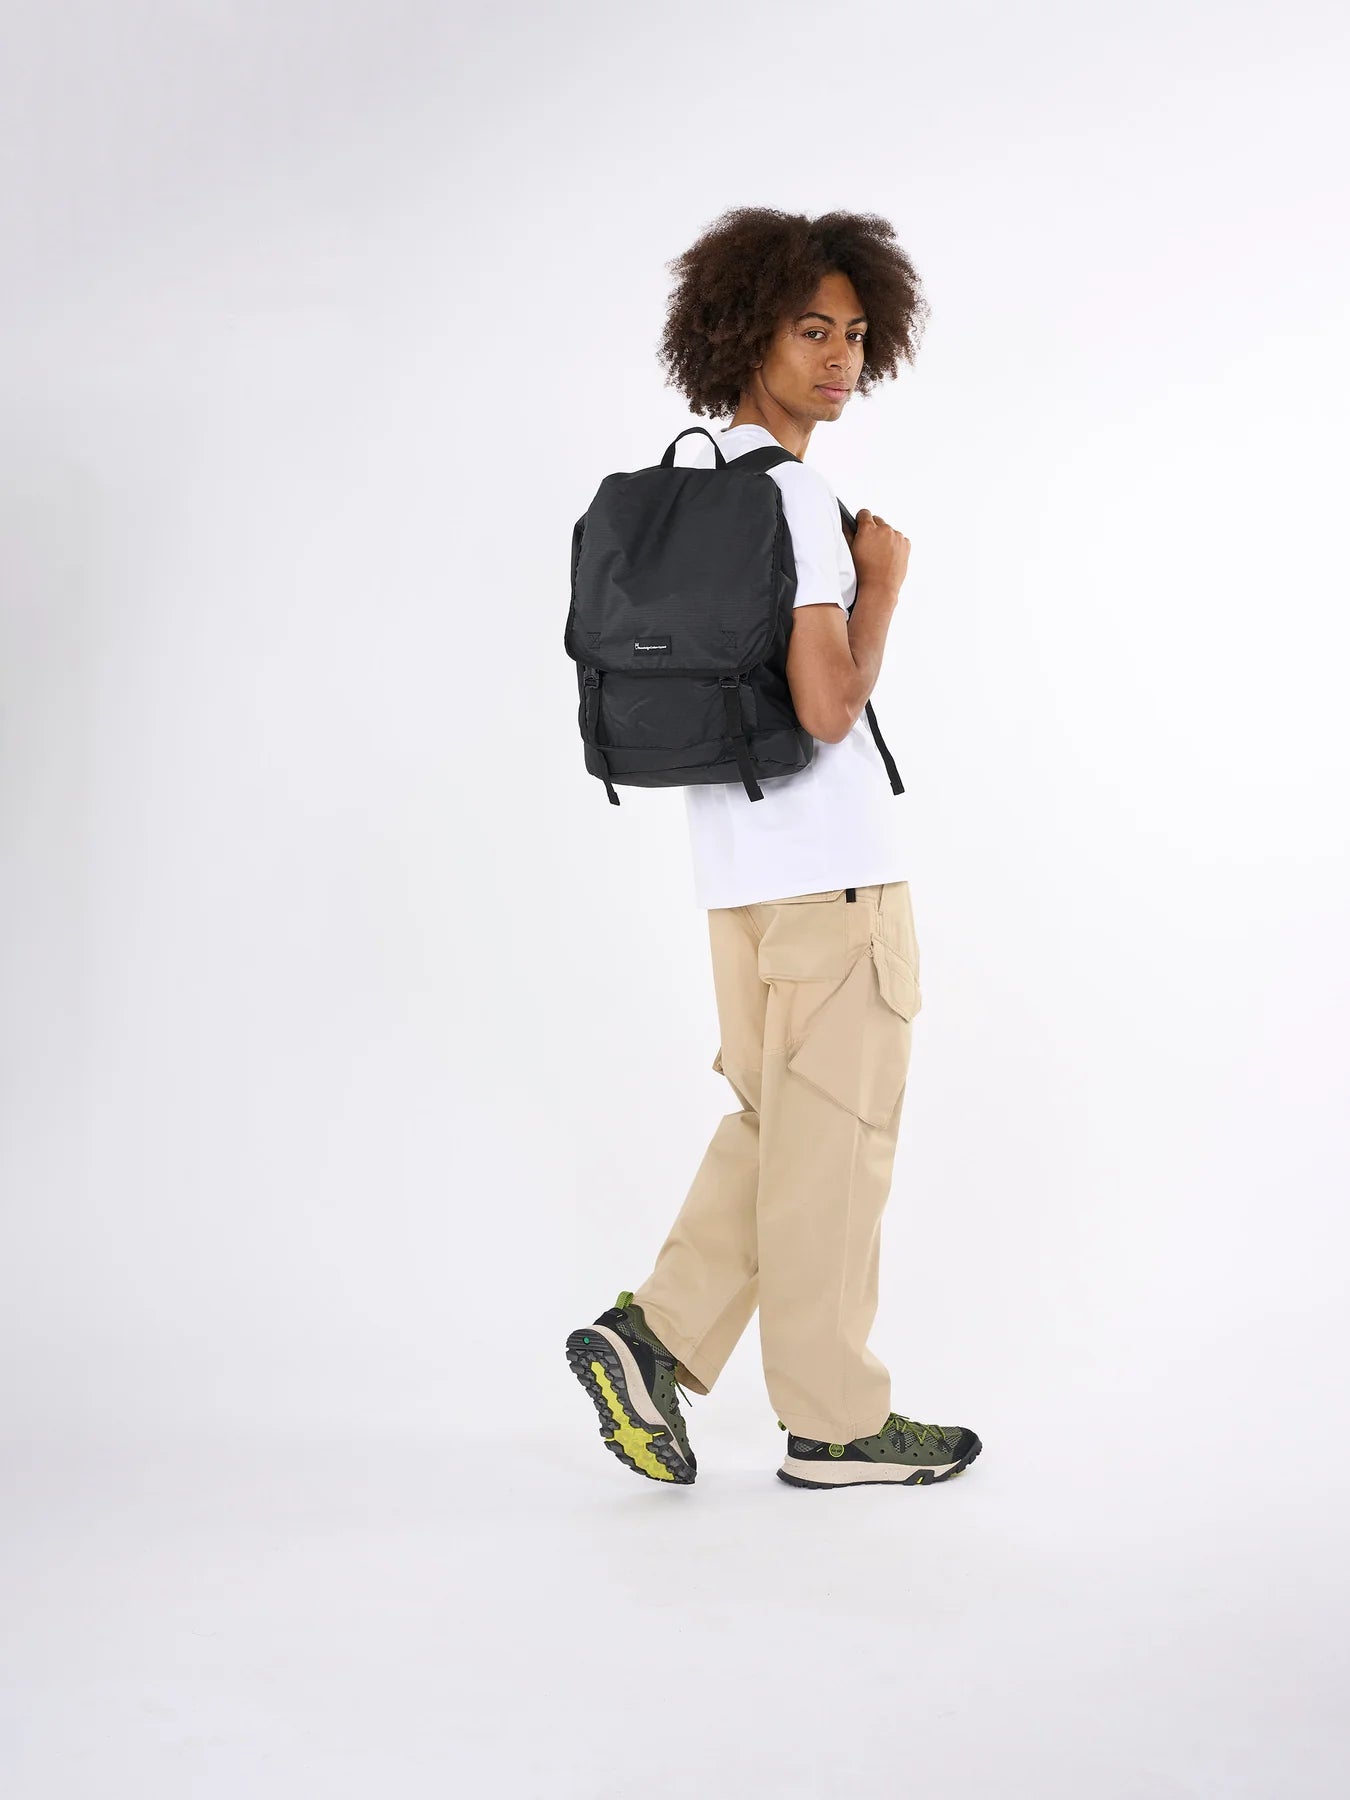 KnowledgeCotton Apparel - Classic backpack 30L - Recycled PET - Weekendbee - sustainable sportswear